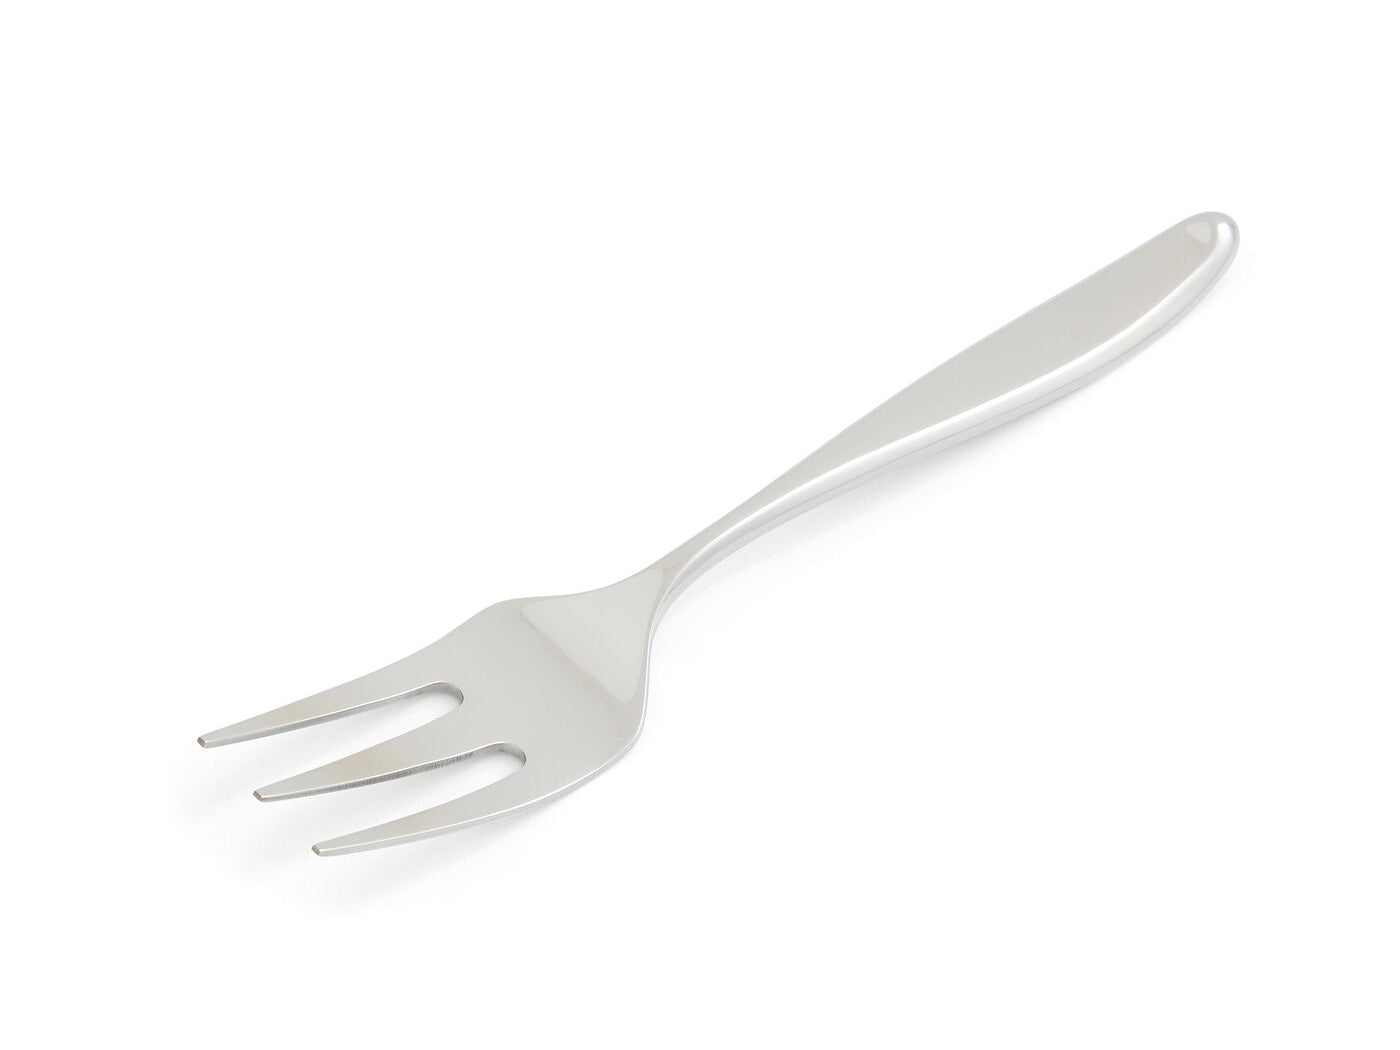 A large serving fork that is made from stainless steel, this is idea for spearing cuts of meat from a platter to deliver them to your dinner plate. It is stylish and trendy, with the silver of the steel matching seamlessly with your cutlery.